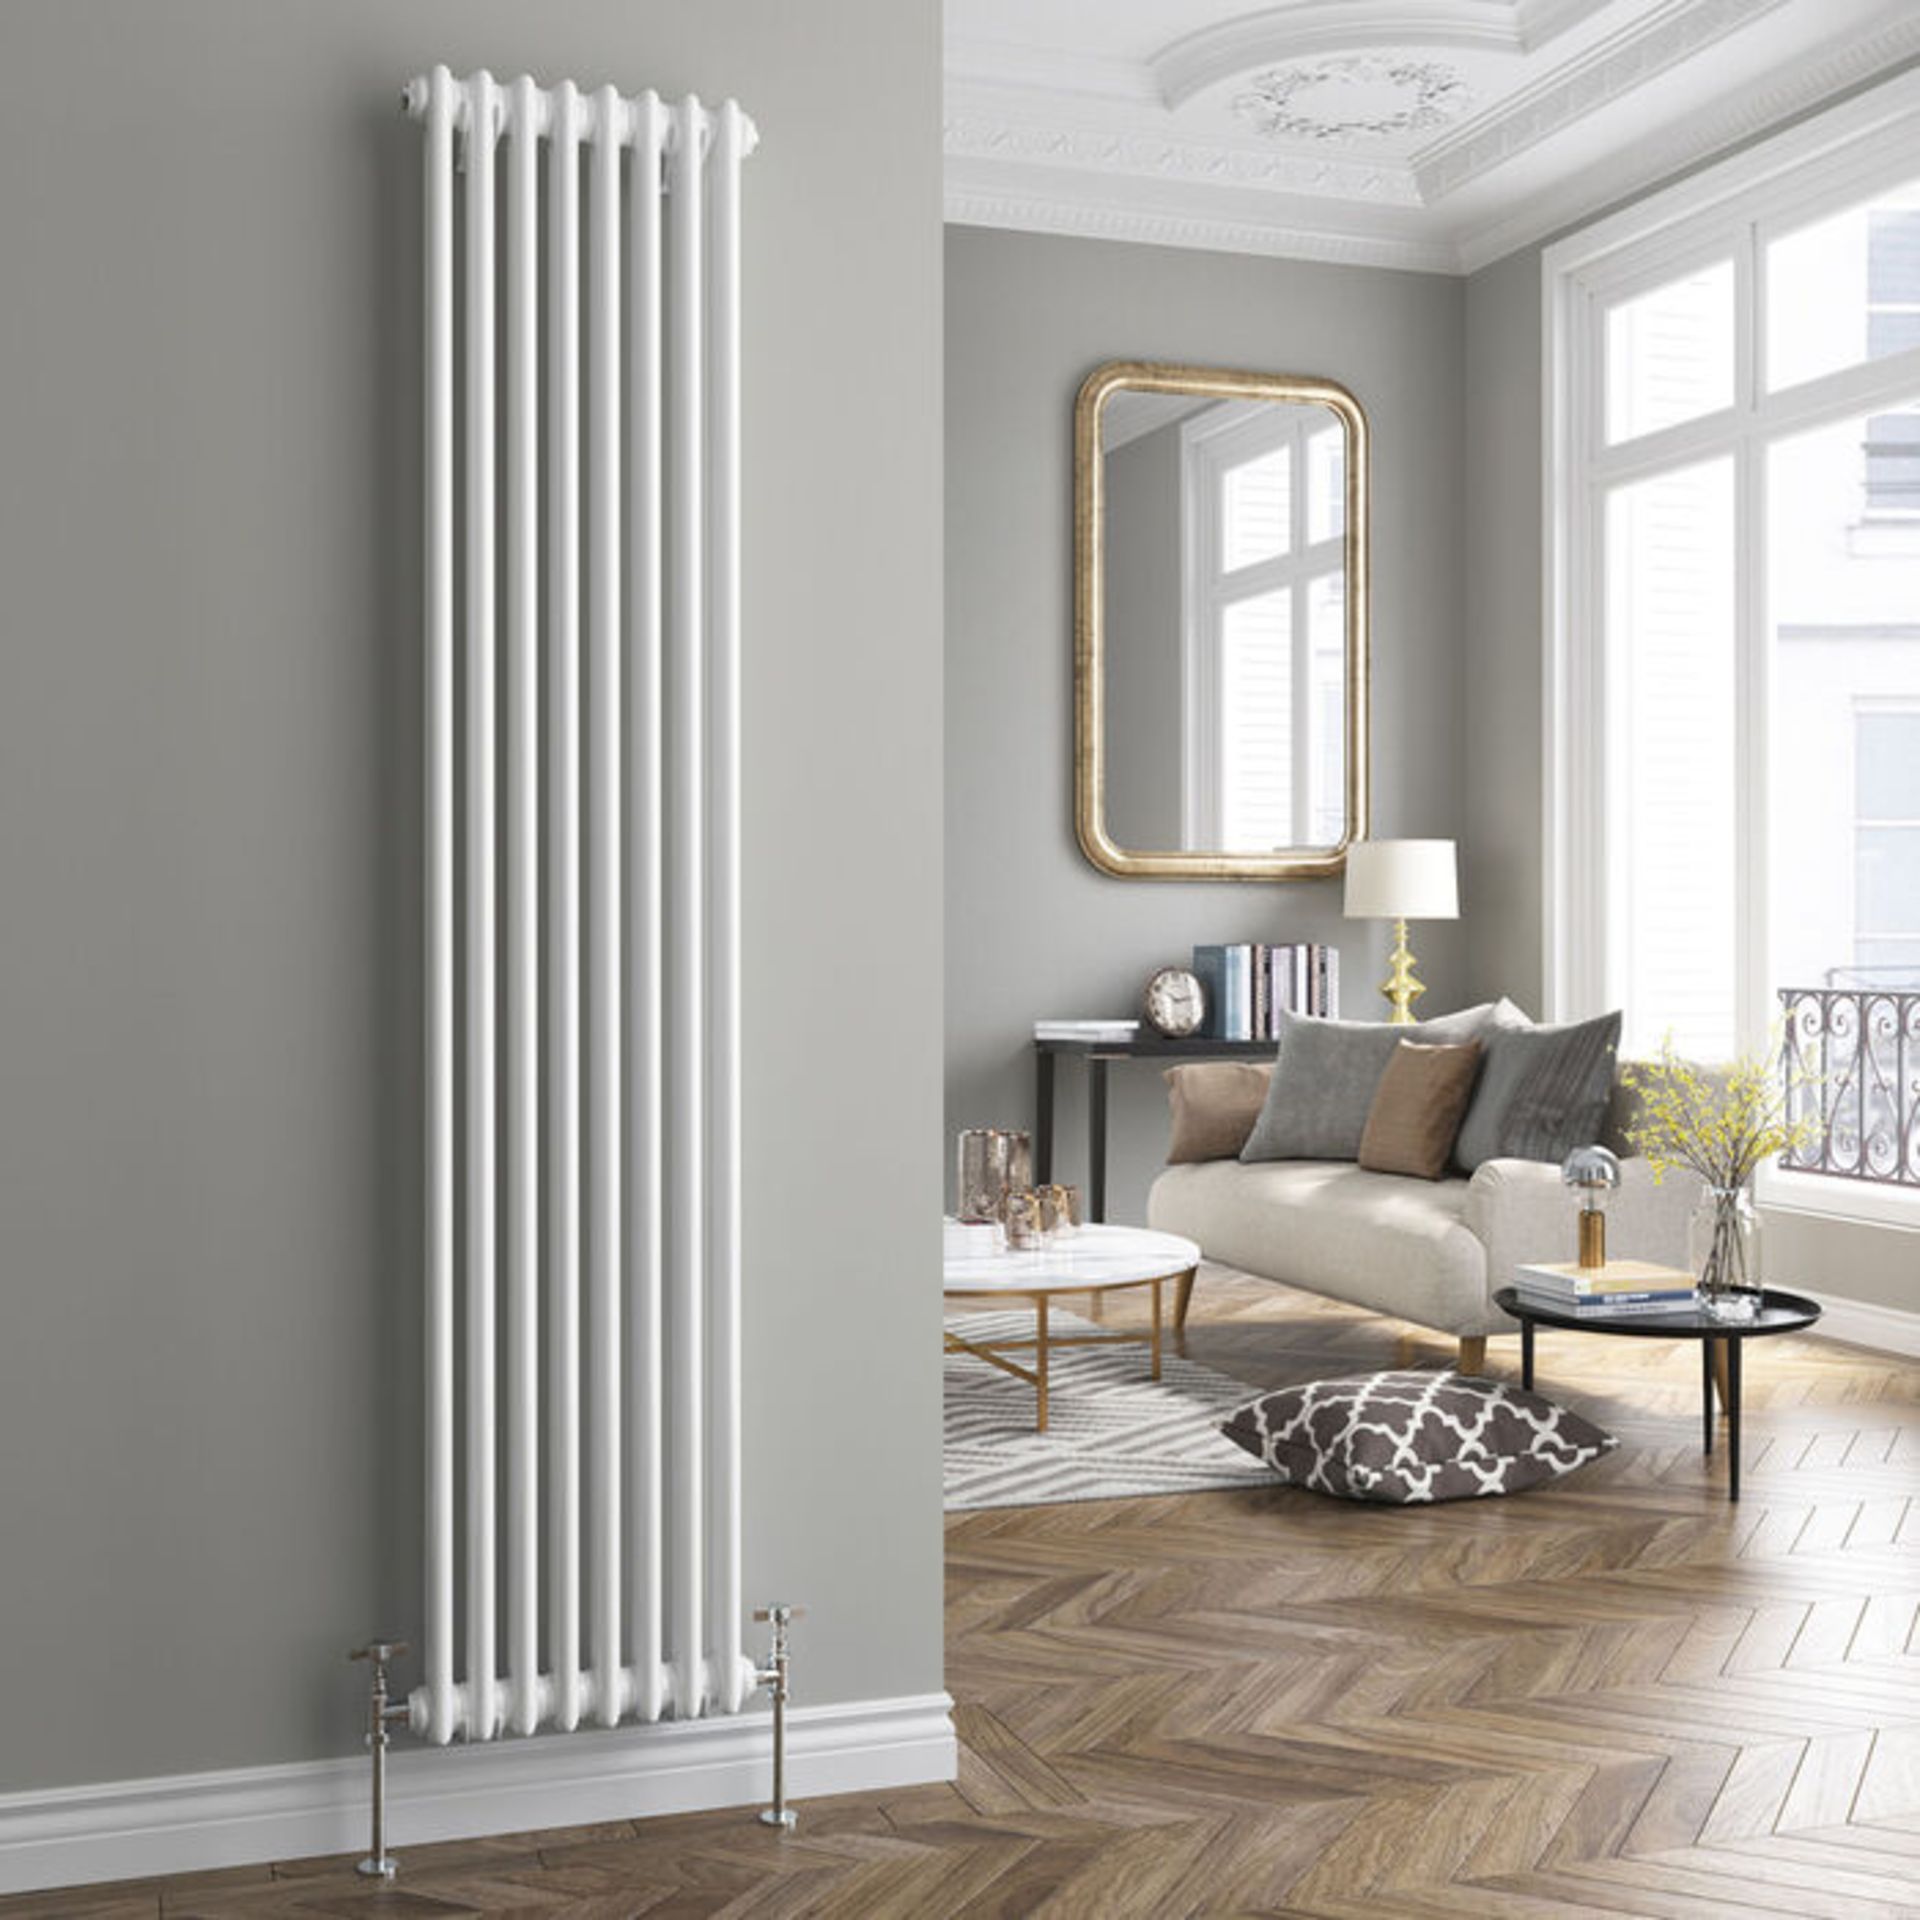 (RR86) 2000x490mm White Double Panel Vertical Colosseum Traditional Radiator. RRP £479.99.For ... (